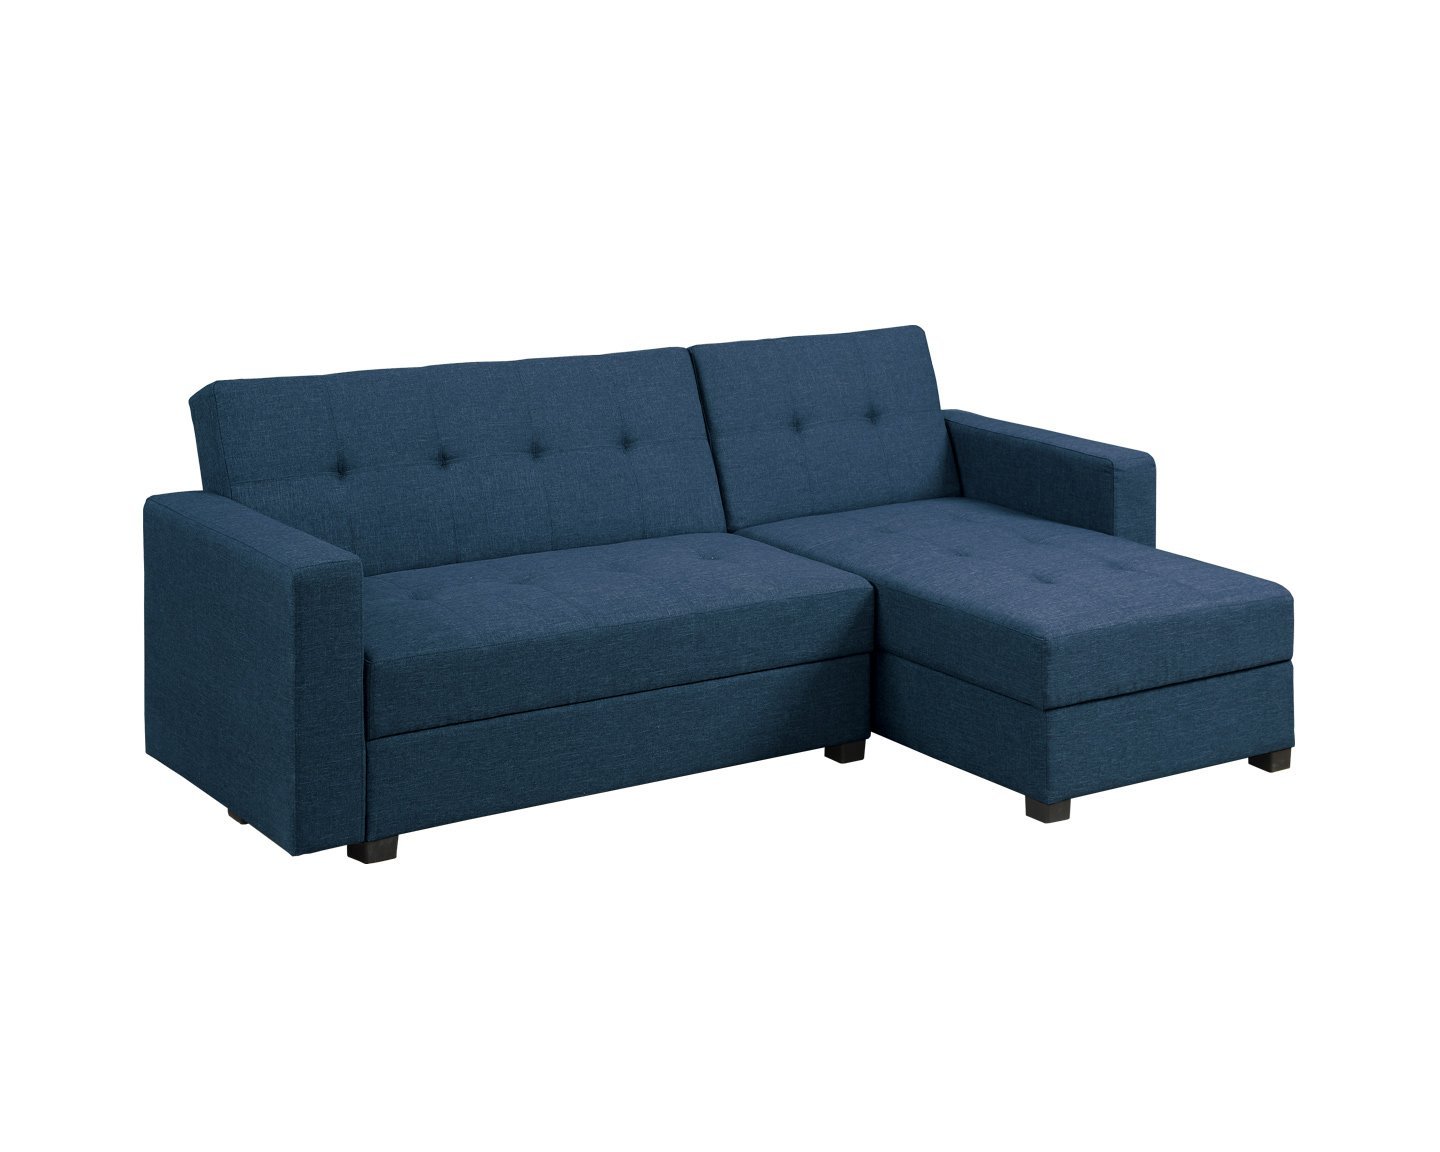 Poundex F7895 Bobkona Medora Linen-Like Left or Right Hand Chaise Adjustable Sectional with Compartment, Navy